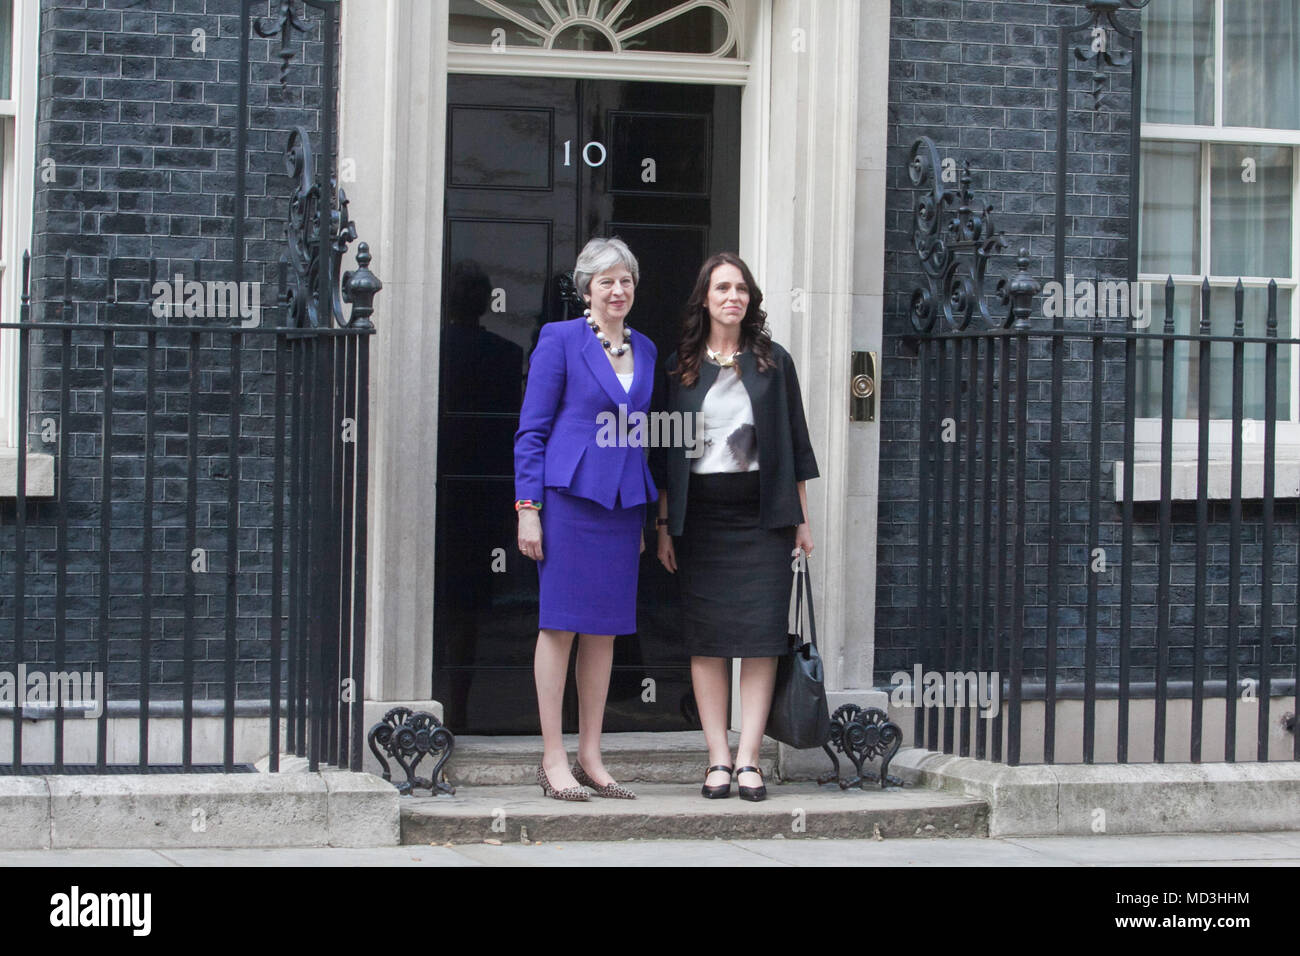 London UK. 18th April 2018. The Prime Minister of New Zealand Jacinda Ardern who is pregnant arrives at Downing Street for a meeting with Theresa May Credit: amer ghazzal/Alamy Live News Stock Photo